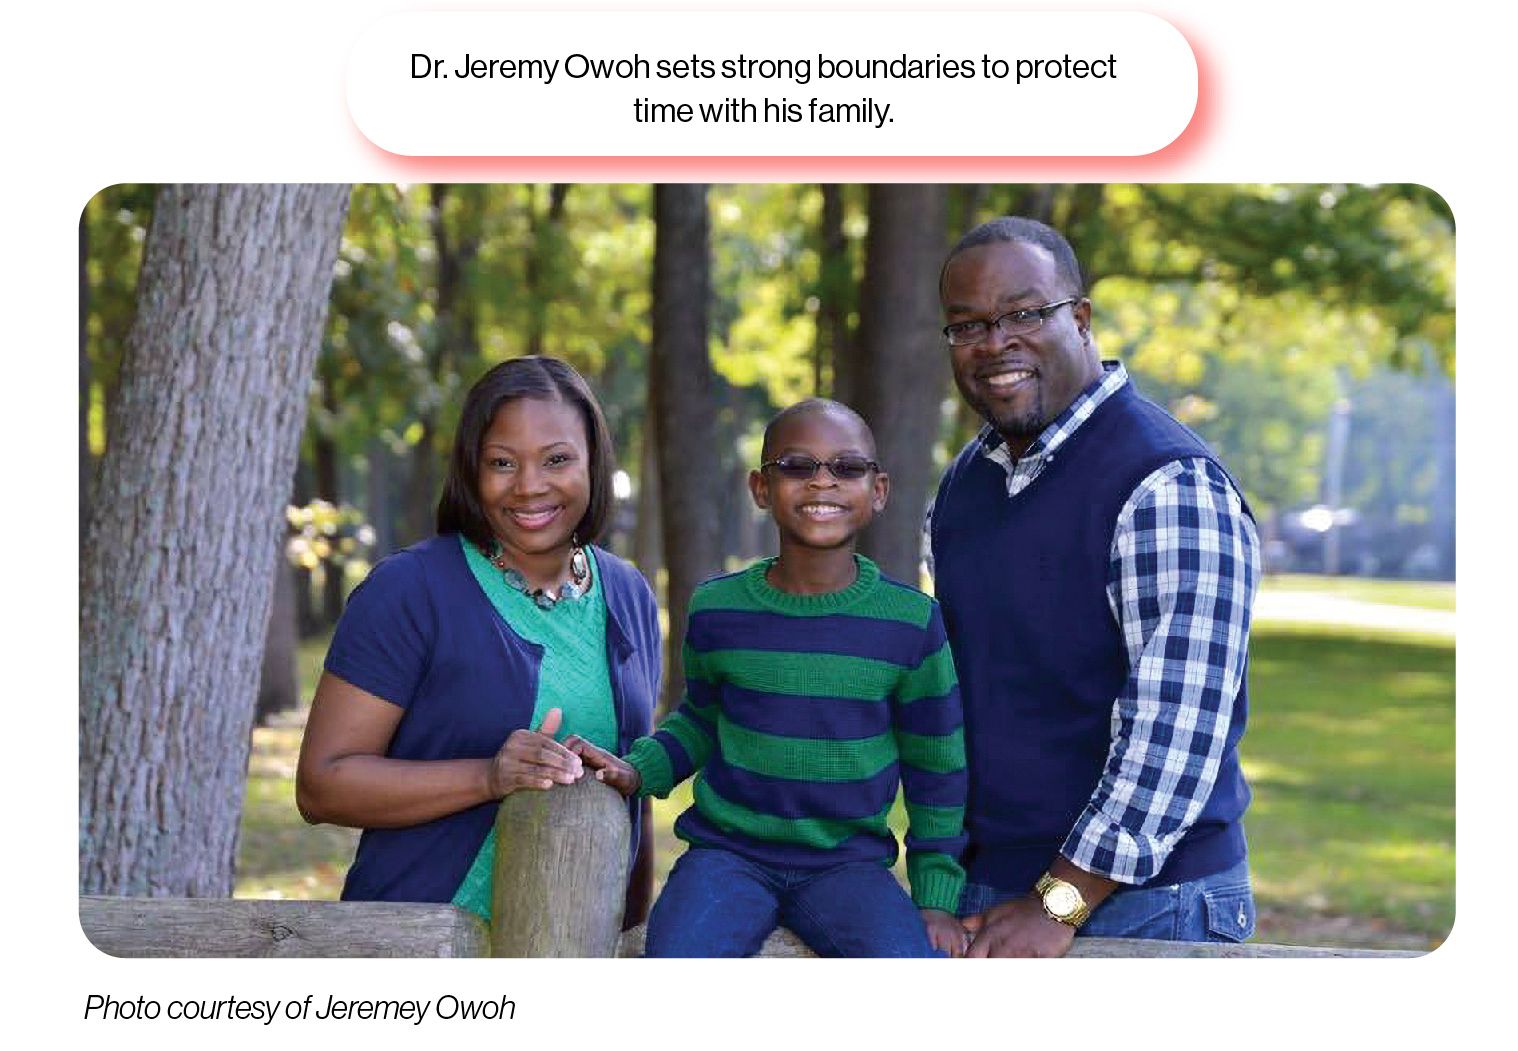 Image: Jacksonville North Pulaski Superintendent Dr. Jeremy Owoh with his wife and son, with the SchoolCEO caption 'Dr. Jeremy Owoh sets strong boundaries to protect time with his family.'